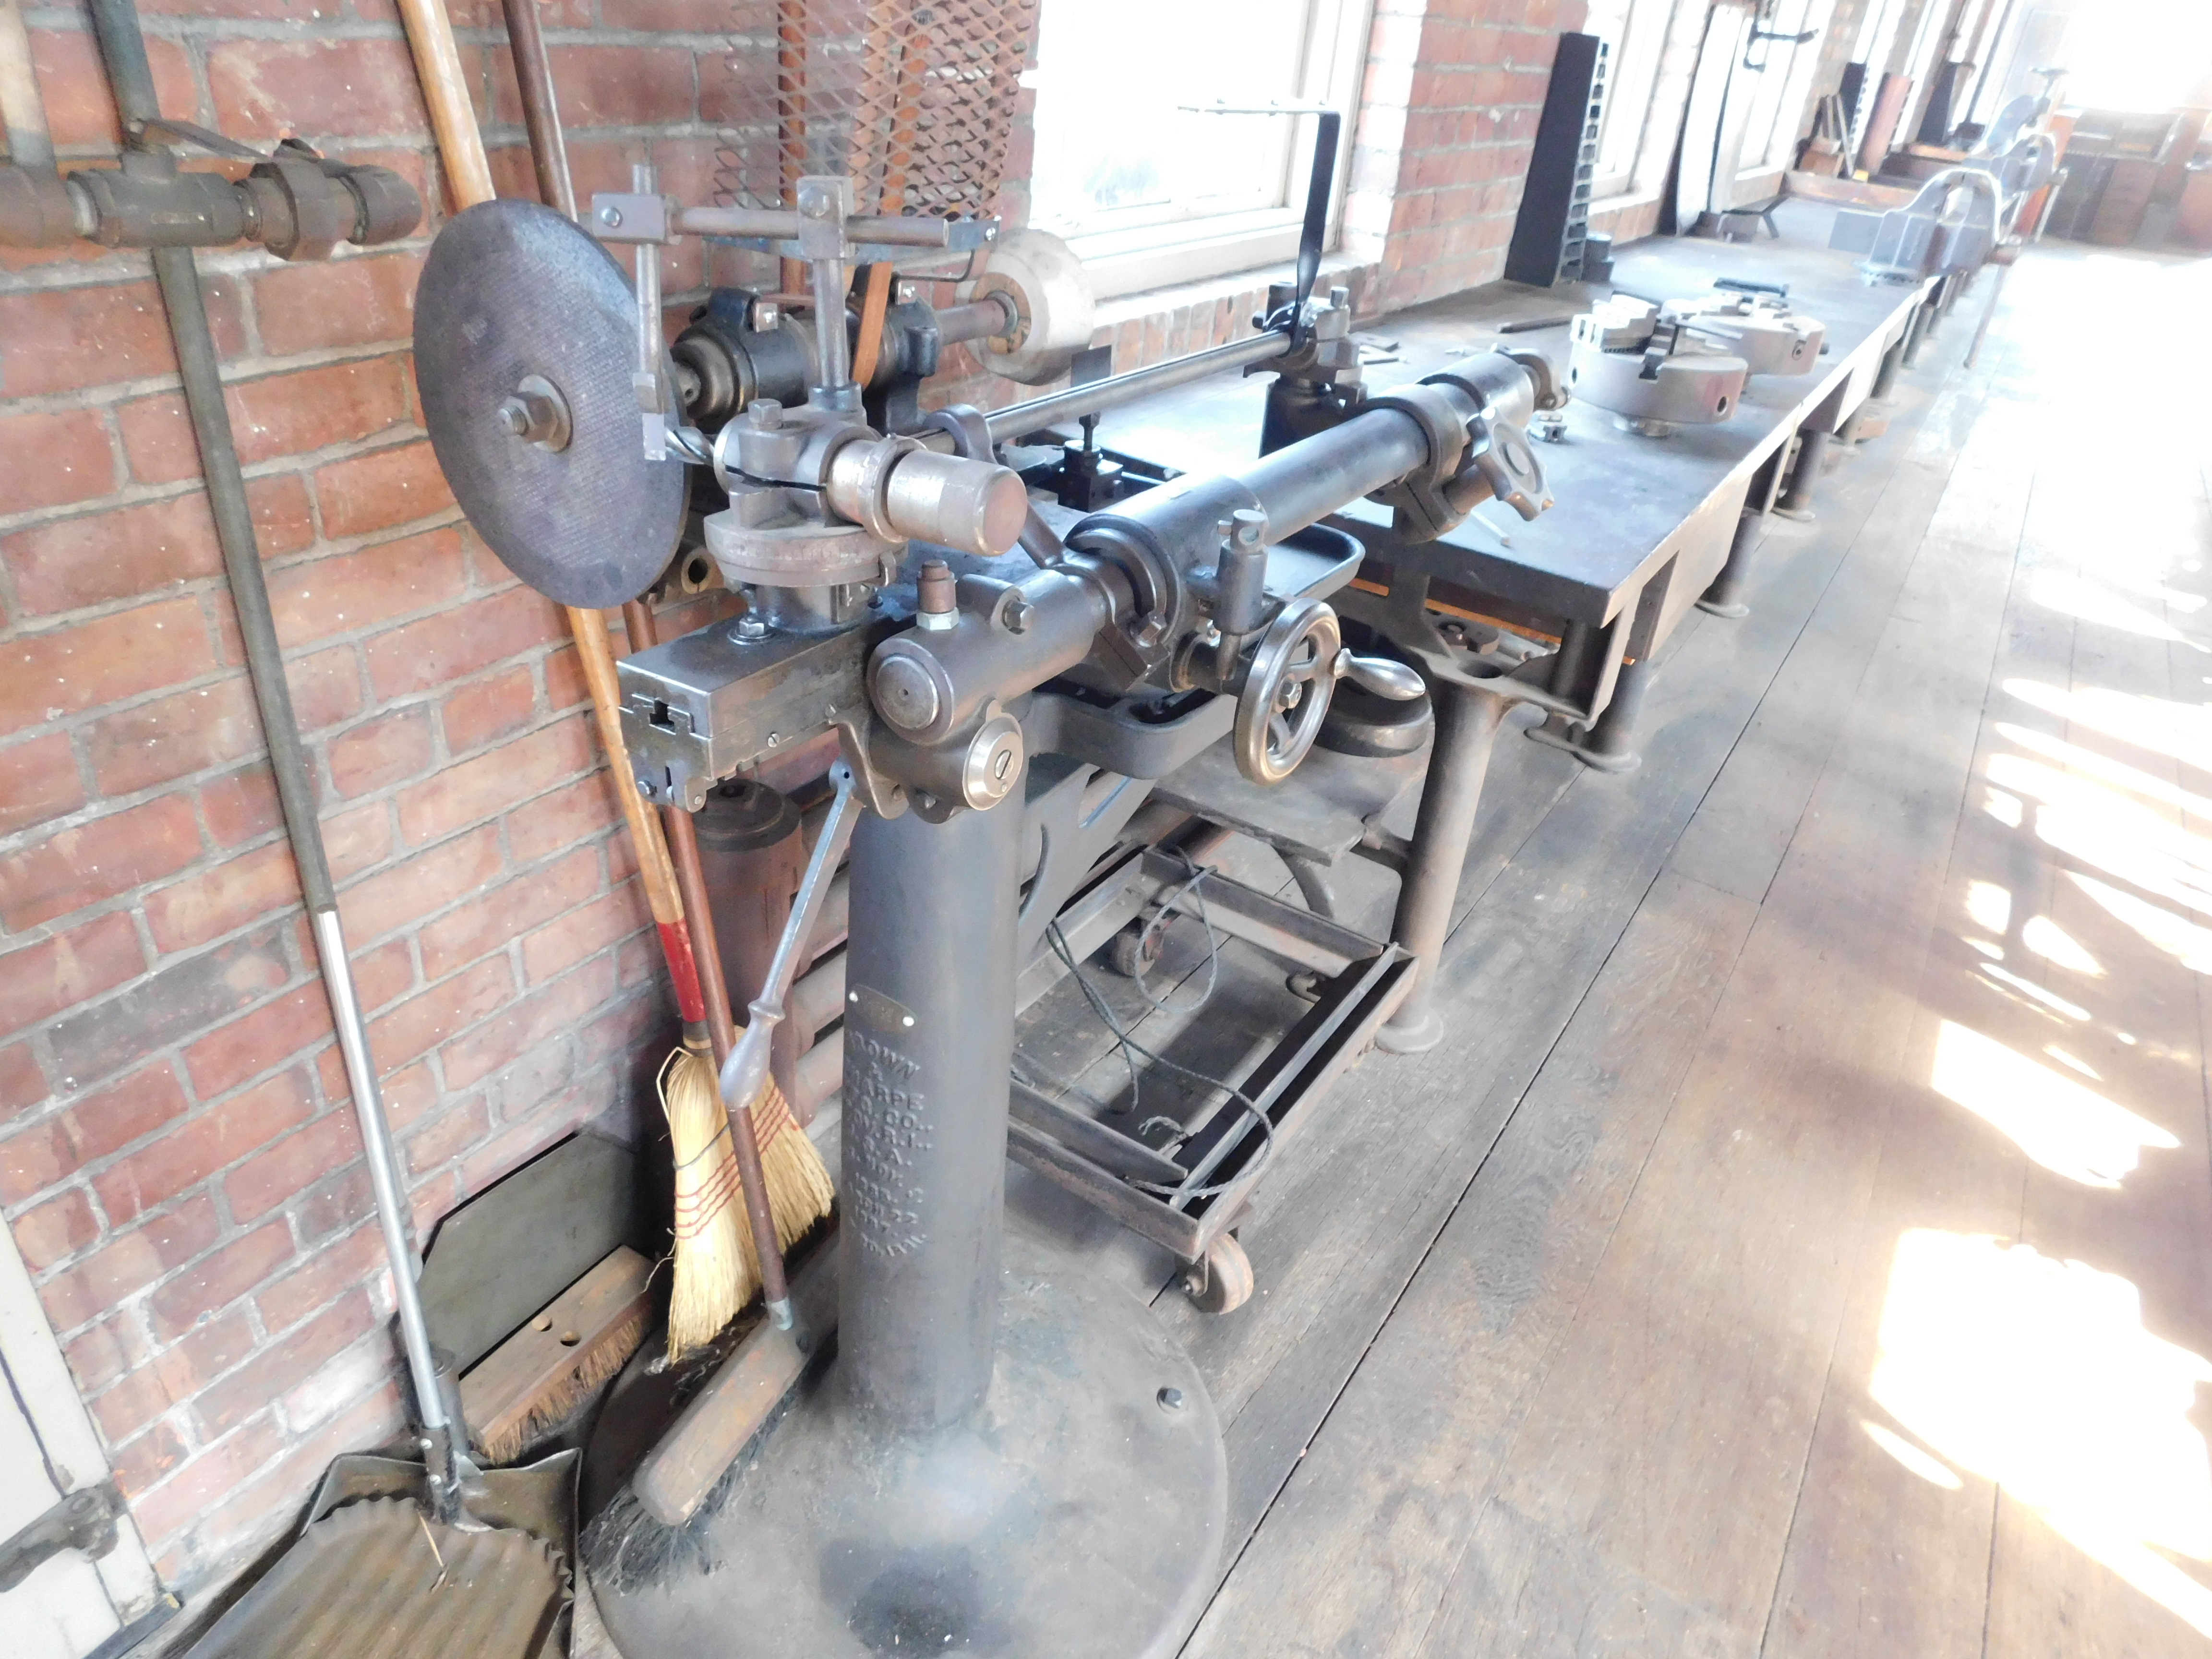   https://antiquemachinery.com/images-HFM/Arlington-and-Sims-Machine-Shop-Edison-Henry-Ford-Museum-DSCN1381-Brown-and-Sharpe-Cutter-Grinder-no-2.JPG  